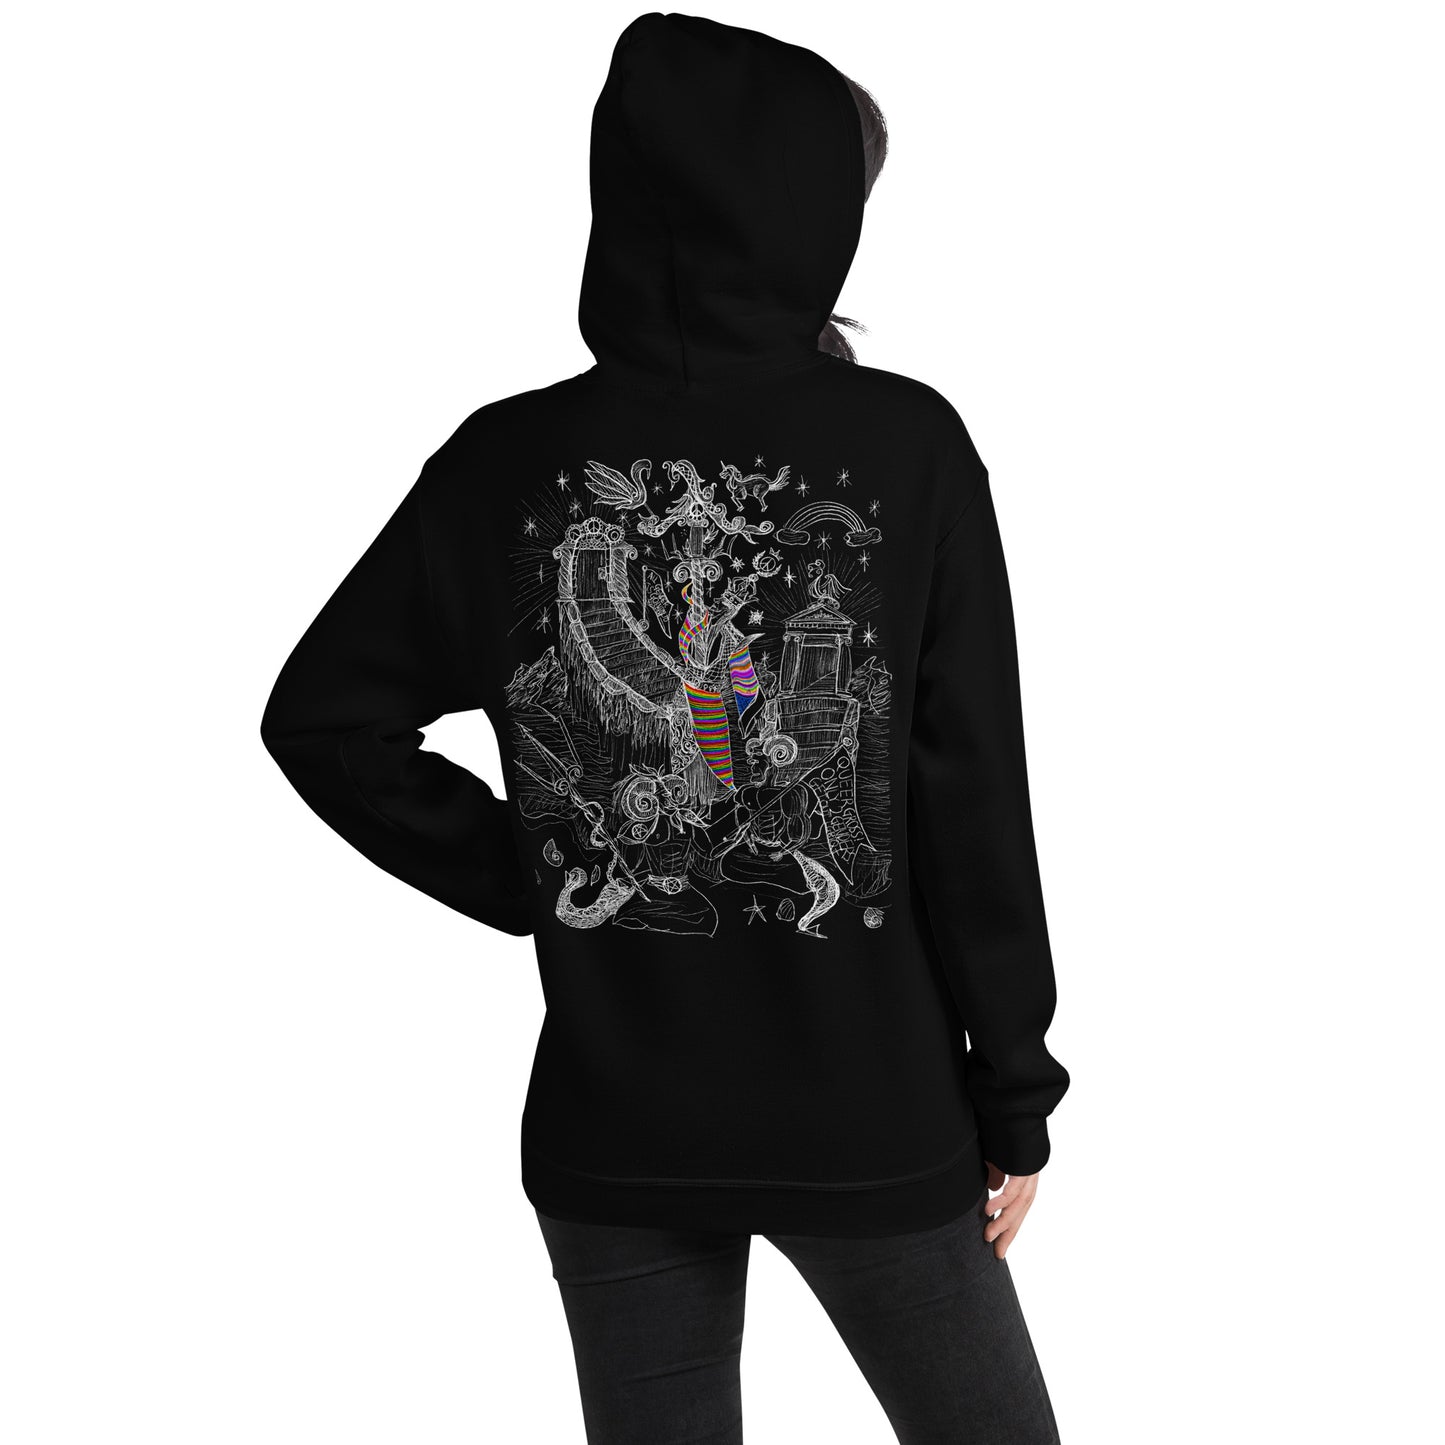 Unisex Hoodie - Save From Evil 2.0